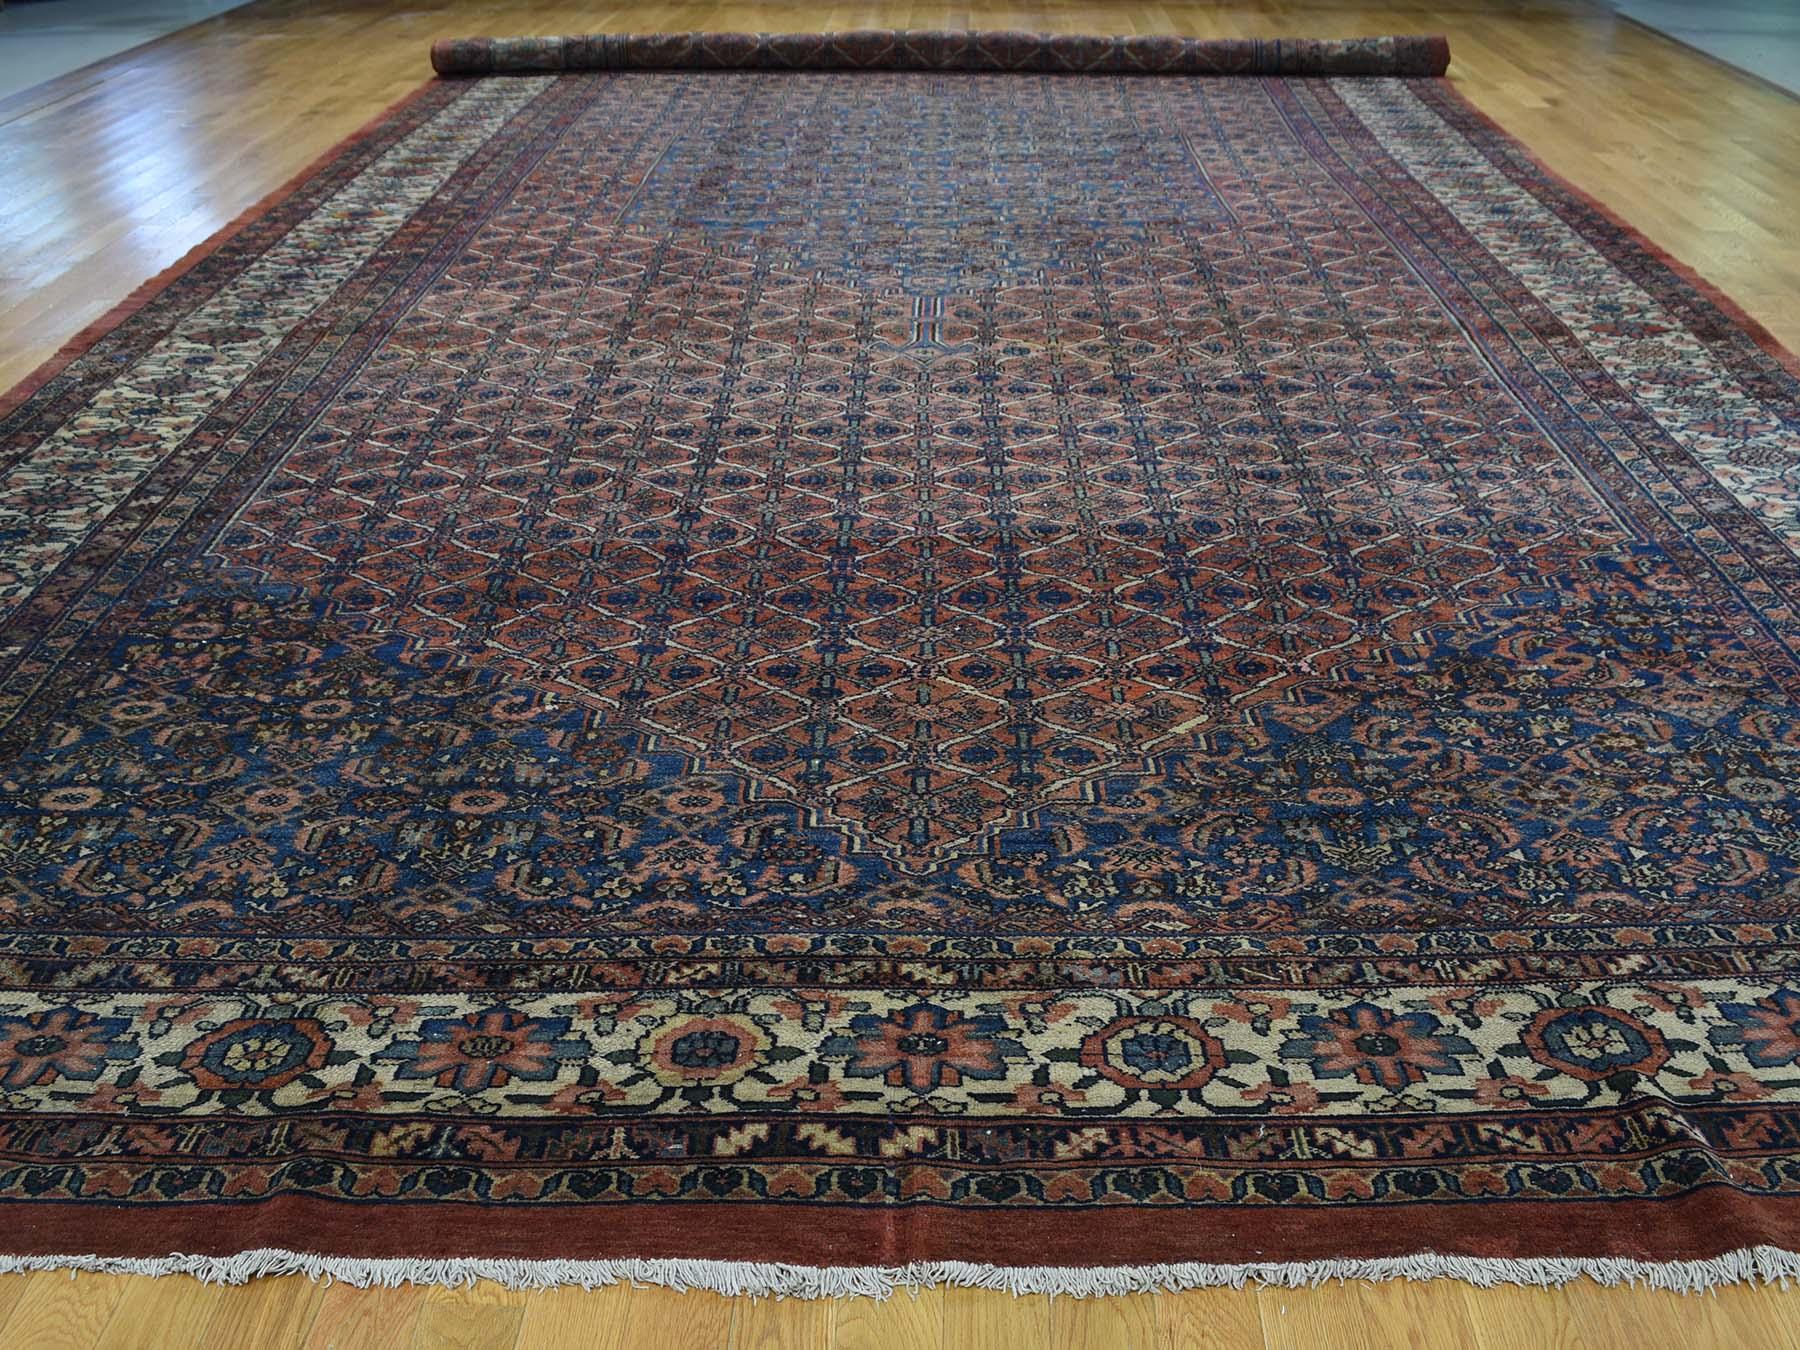 This is a genuine hand knotted oriental rug. It is not hand tufted or machine made rug. Our entire inventory is made of either hand knotted or handwoven rugs.

Adorn your house style with this splendid antique carpet. This handcrafted Persian